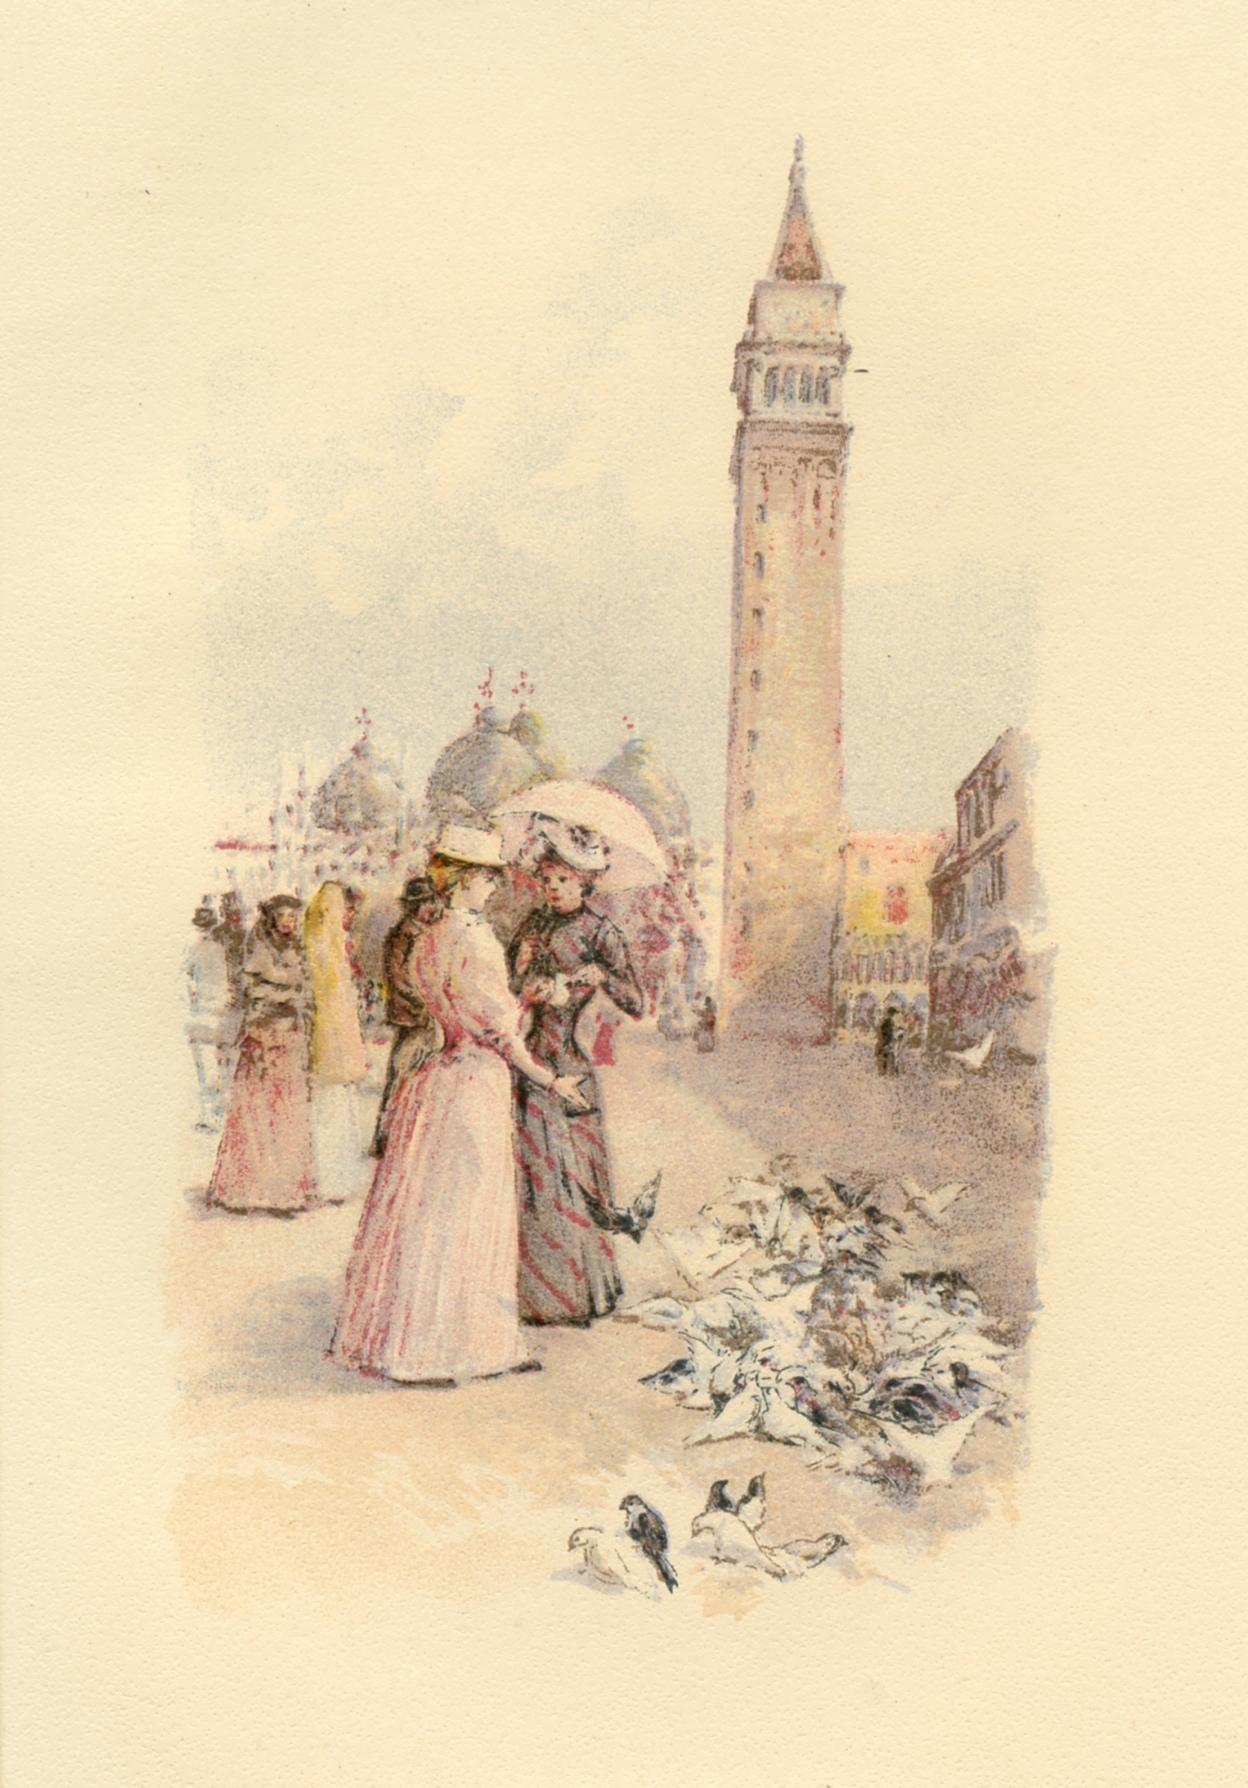 Medium: chromolithograph (after the watercolor). This delightful antique lithograph was published in a small edition in 1892 to illustrate a rare volume with scenes of Venetian life. A beautiful, richly inked impression on cream wove paper. Image